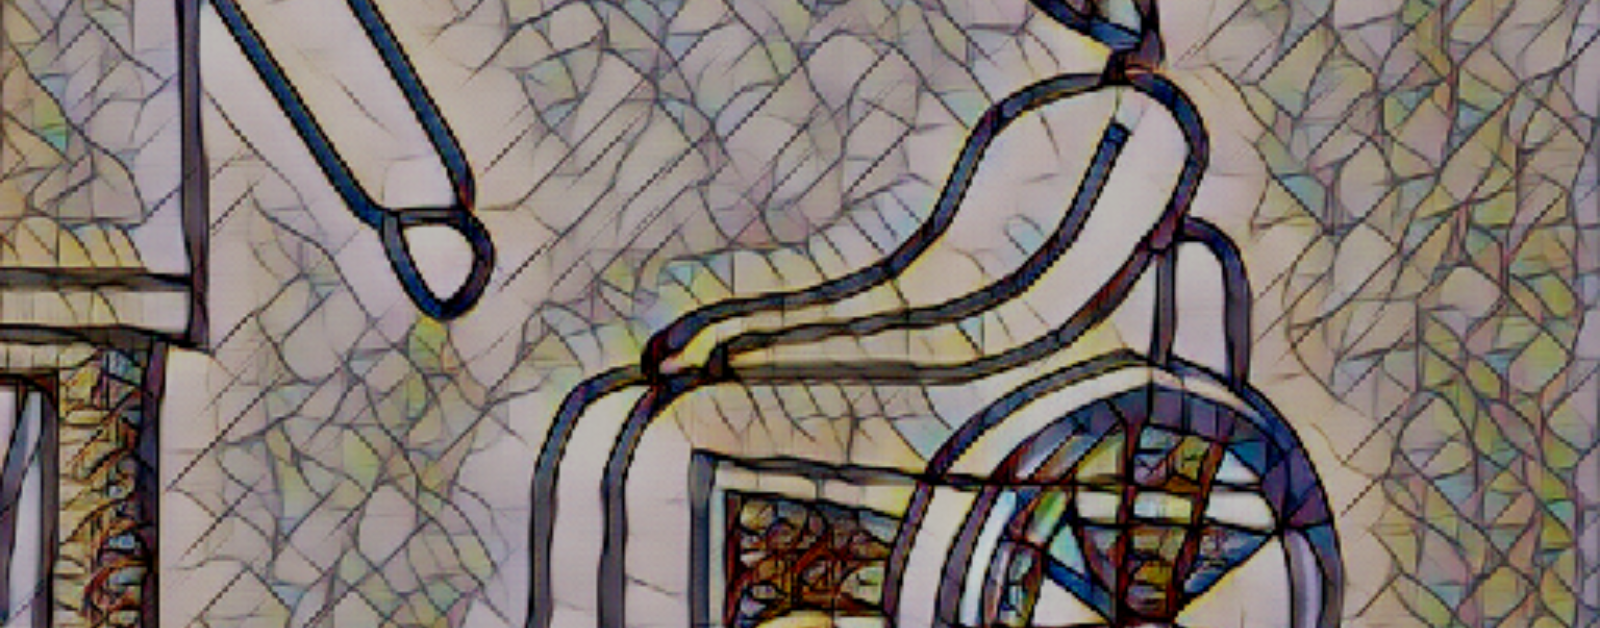 mosaic filter over a drawing of a person using a wheelchair with another person reaching out their hand